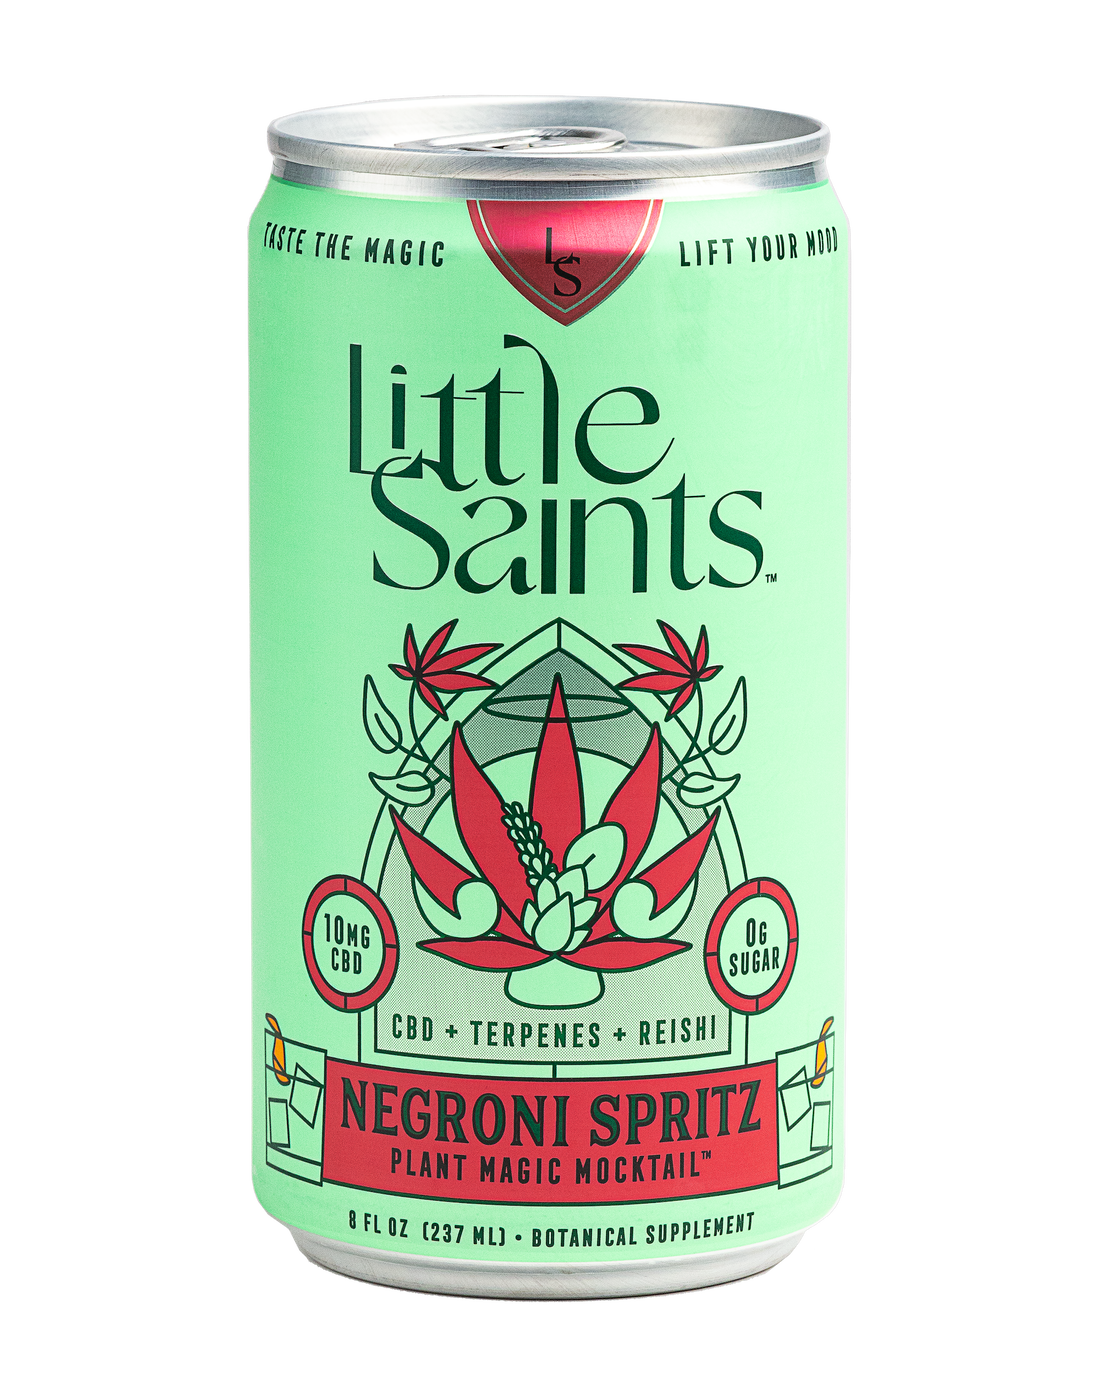 Little Saints - Negroni Spritz Plant Magic Mocktail - 8oz Can - Boisson — Brooklyn's Non-Alcoholic Spirits, Beer, Wine, and Home Bar Shop in Cobble Hill